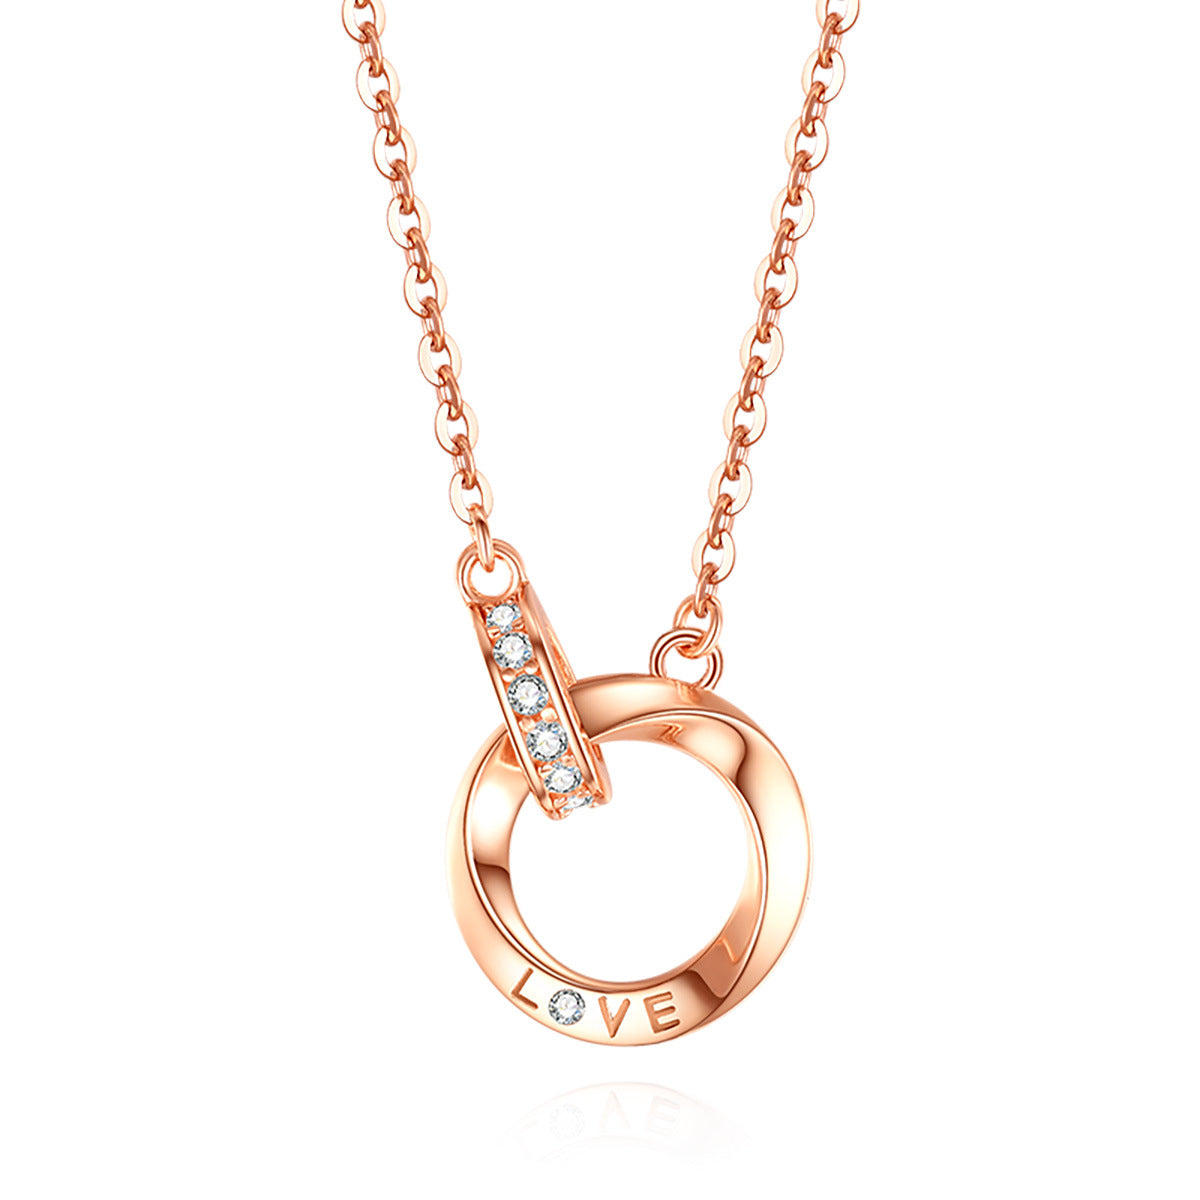 Evecoco Double Circles Necklace With Zircon